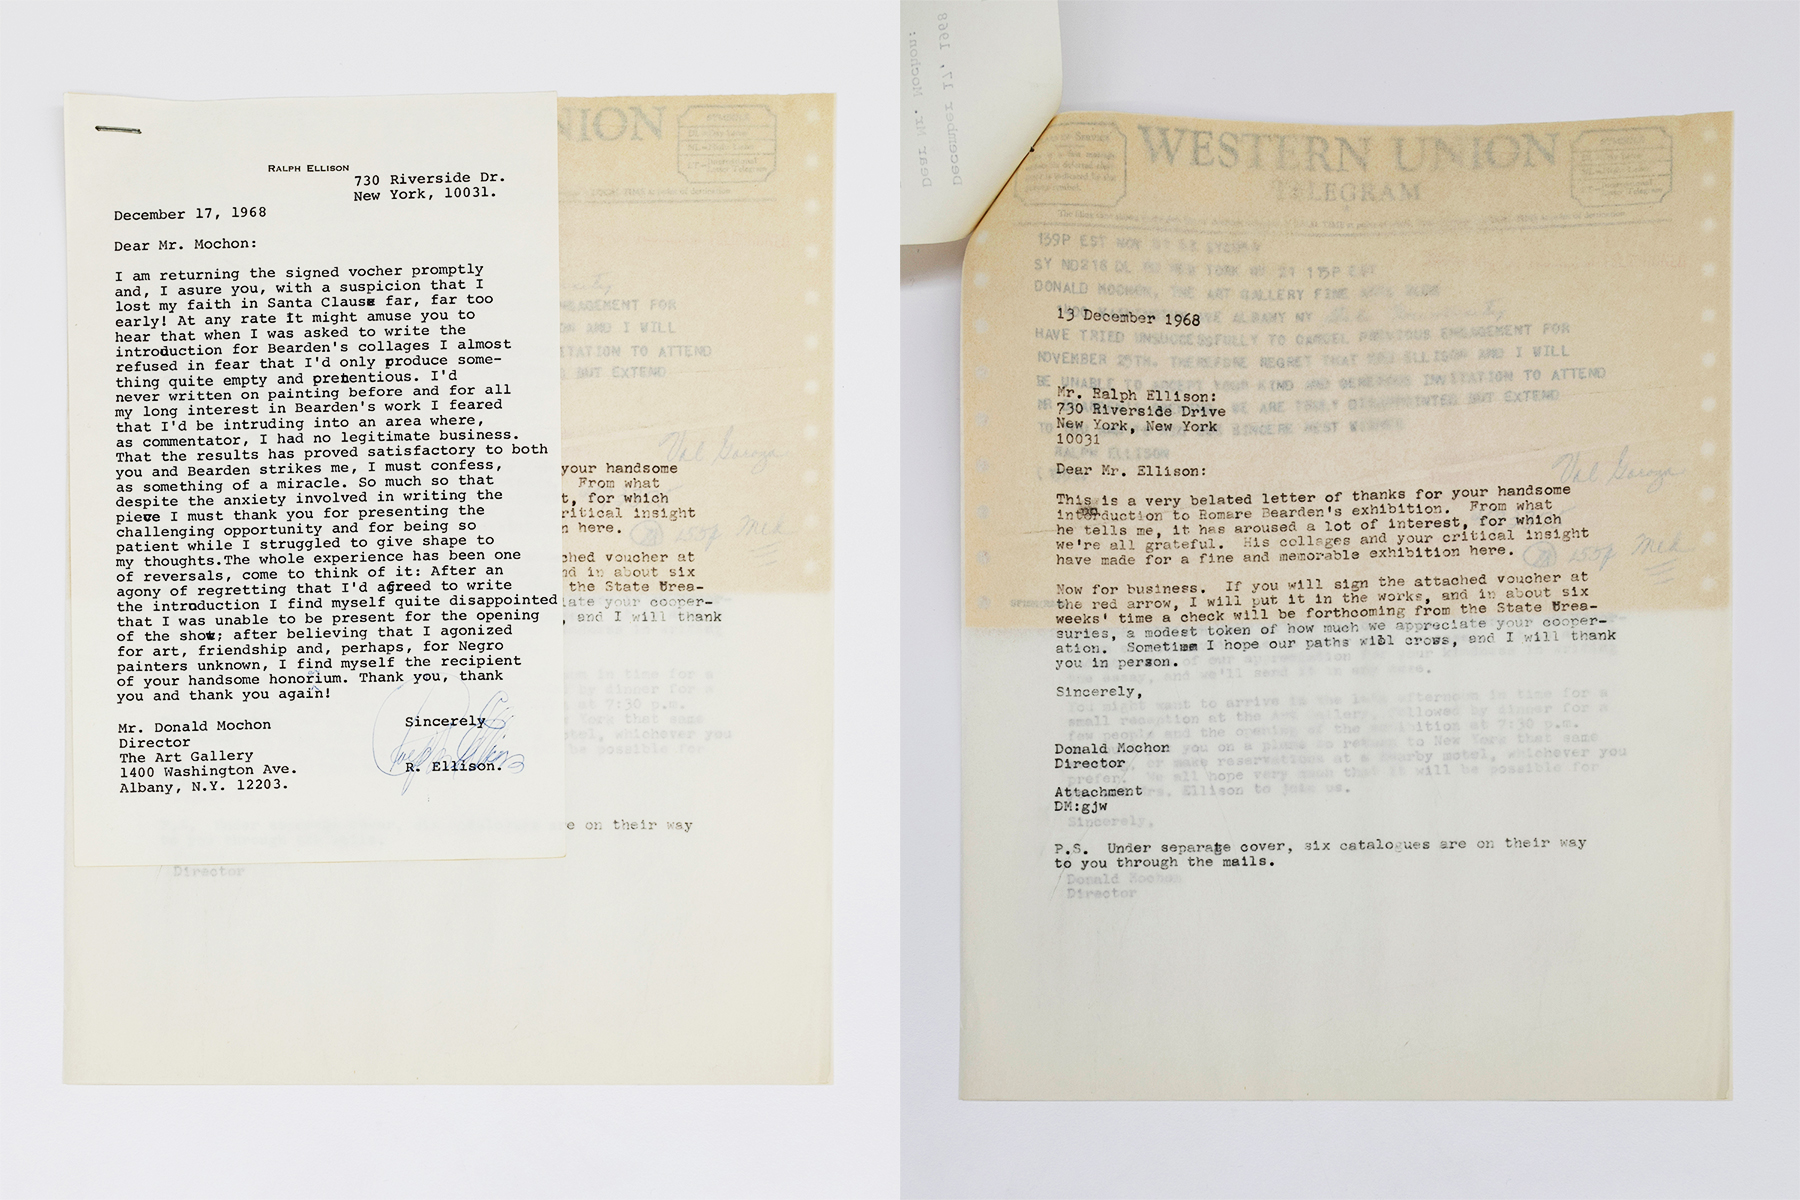 Photographs of two pages from a typewritten letter